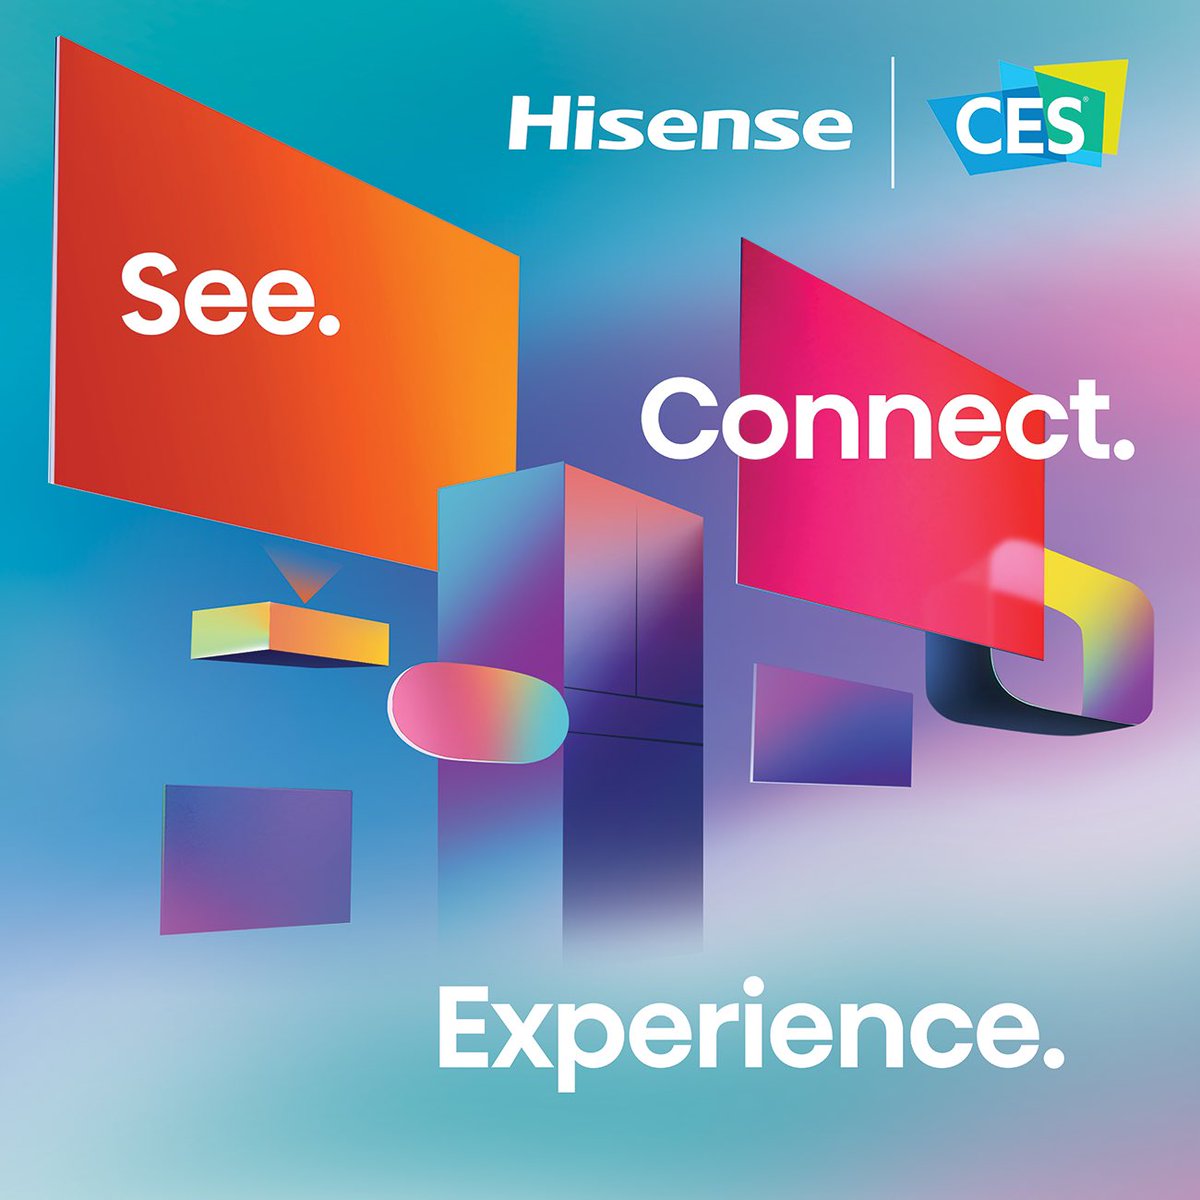 Hisense is back at #CES with another wave of innovation and fun. Come #SeeConnectExperience what we’ve got to offer 👀 #HisenseCES #HisenseCES2024